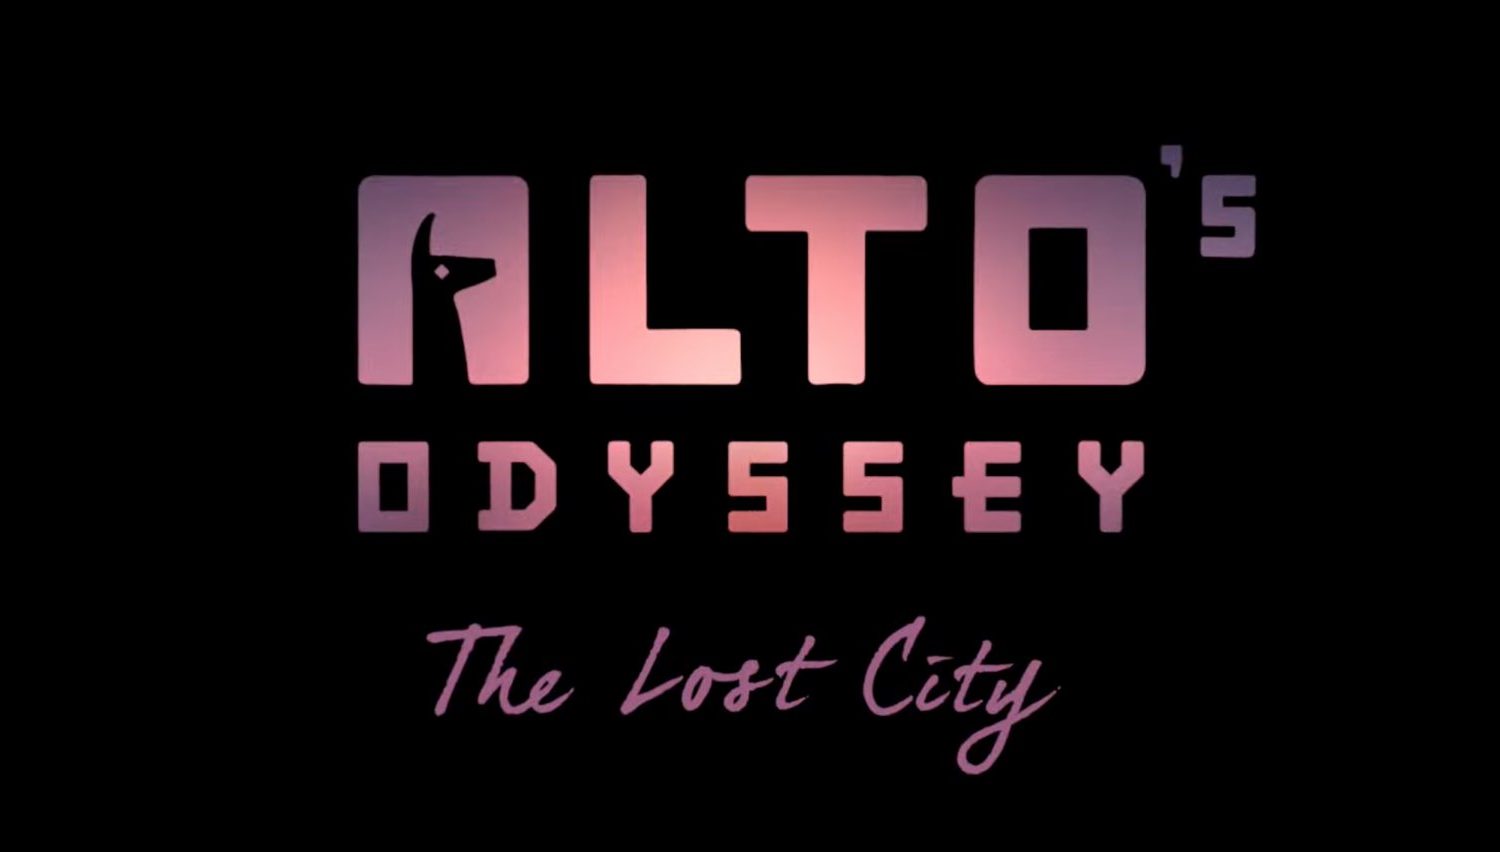 A logo for the game Alto's Odyssey: The Lost City set against a black background